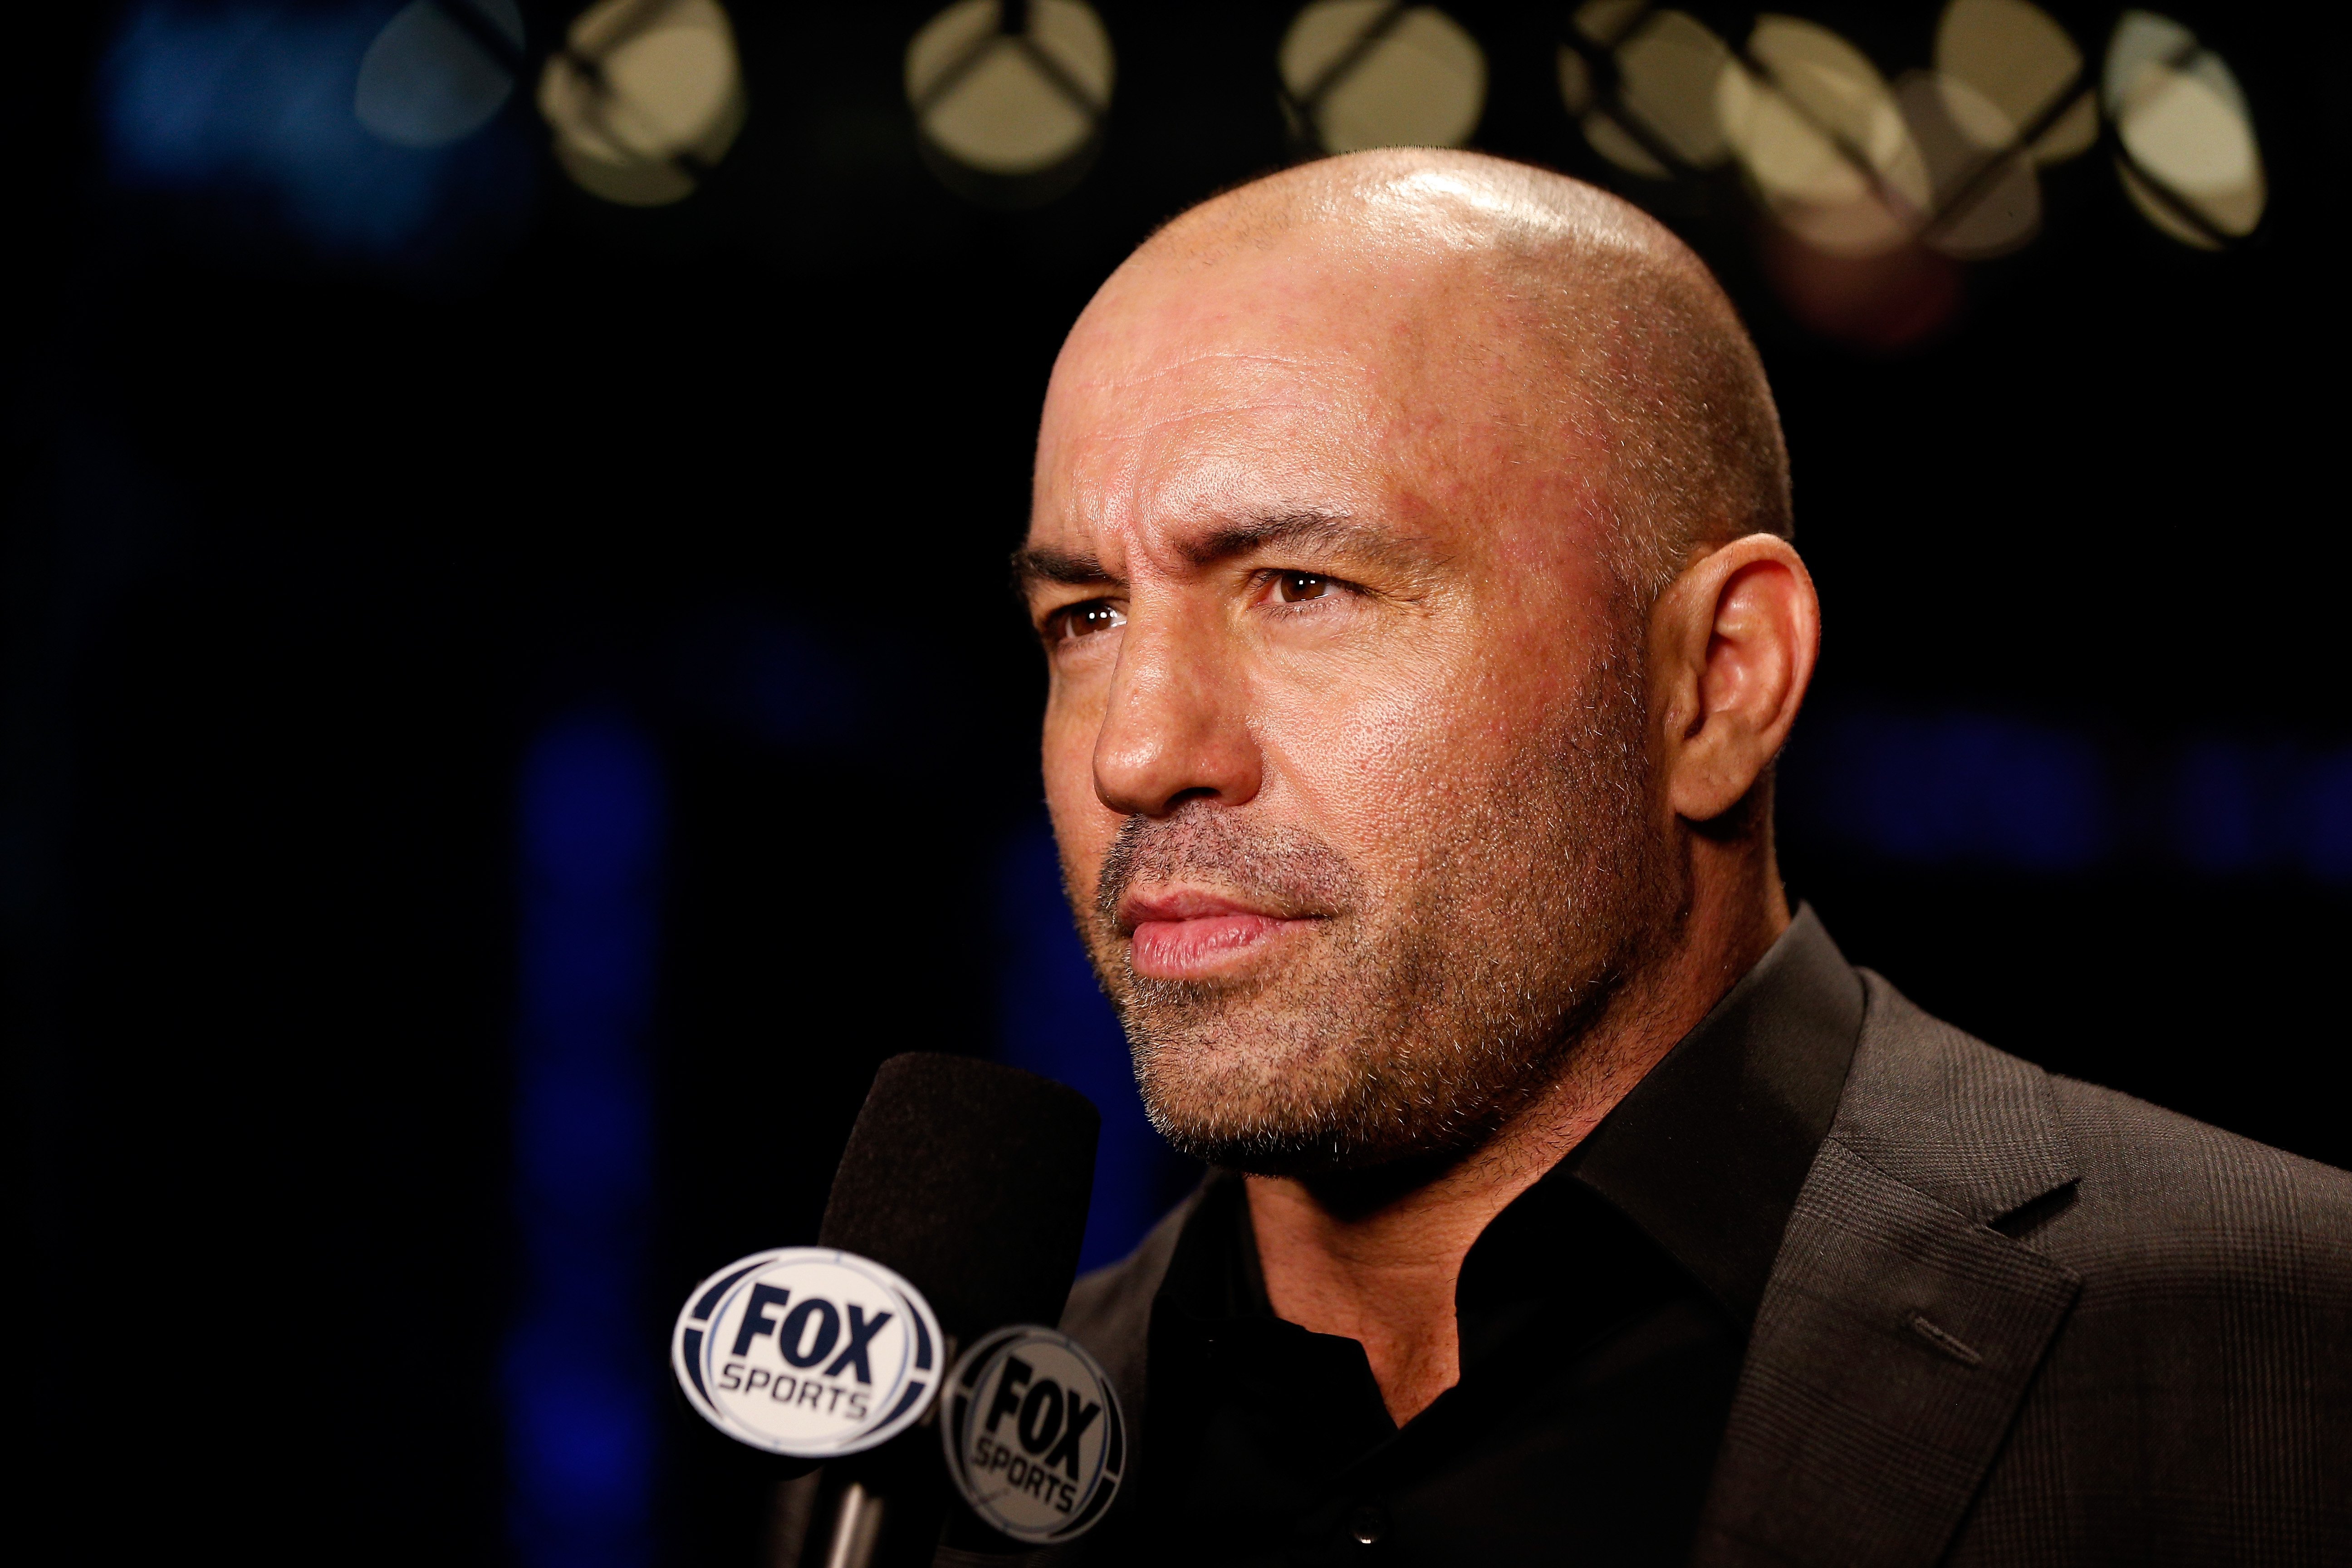 Joe Rogan speaks on camera during the FOX UFC Saturday event at the Amway Center on April 19, 2014, in Orlando, Florida. | Source: Getty Images